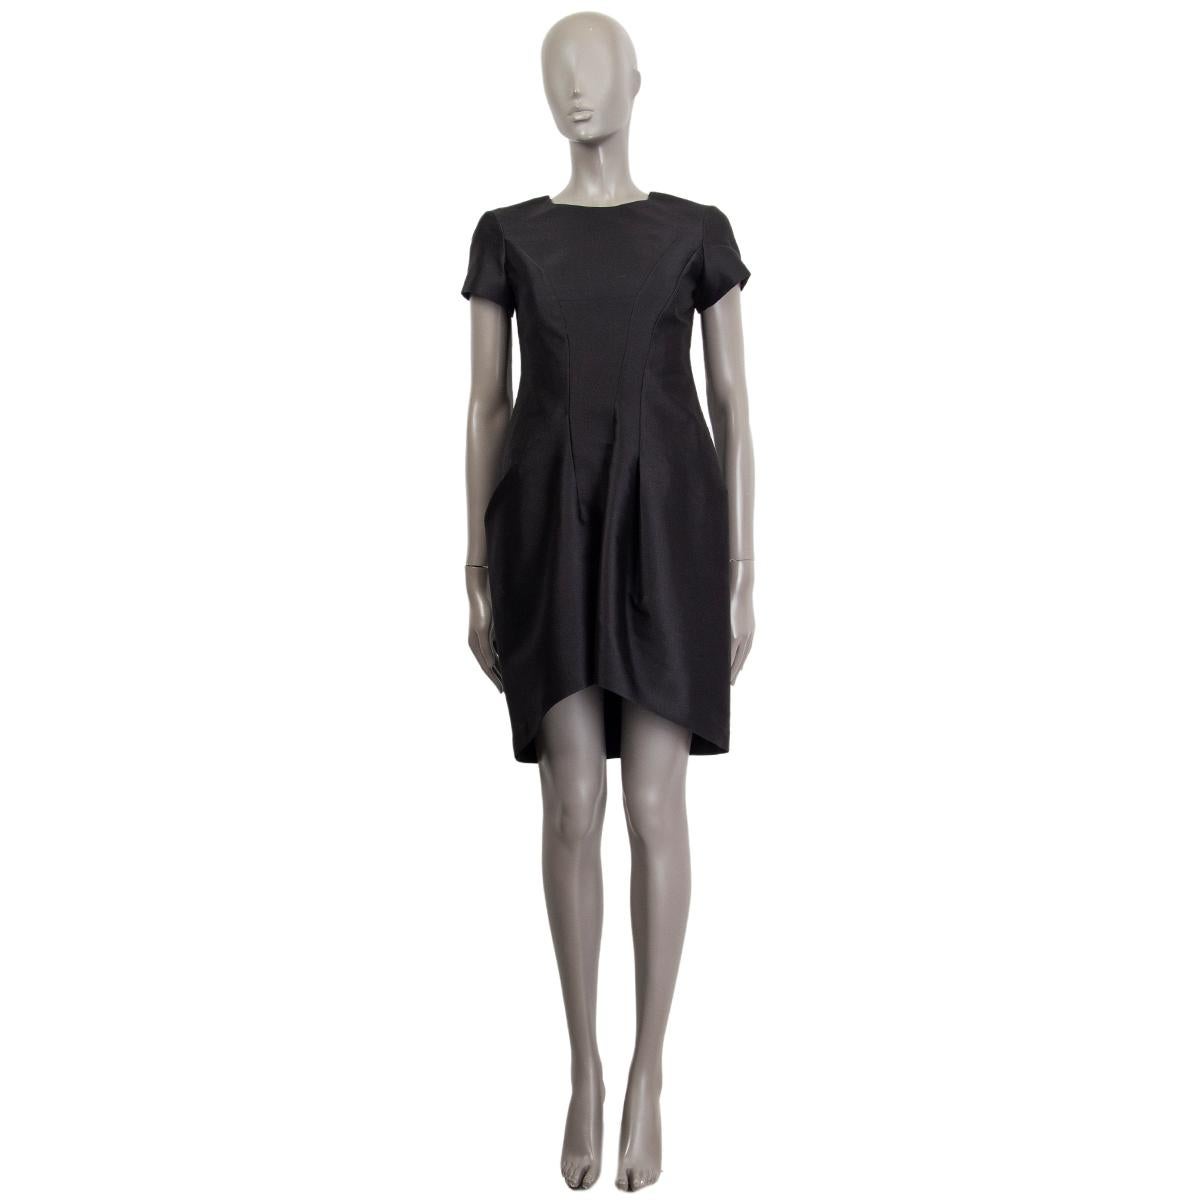 100% authentic Jil Sander structured short sleeve dress in black wool (43%), cotton (38%), polyester (17%), nylon (2%) featuring two front pleats. Lined in silk (53%) and cupro (47%). Back part is longer than the front. Opens with a zipper on the